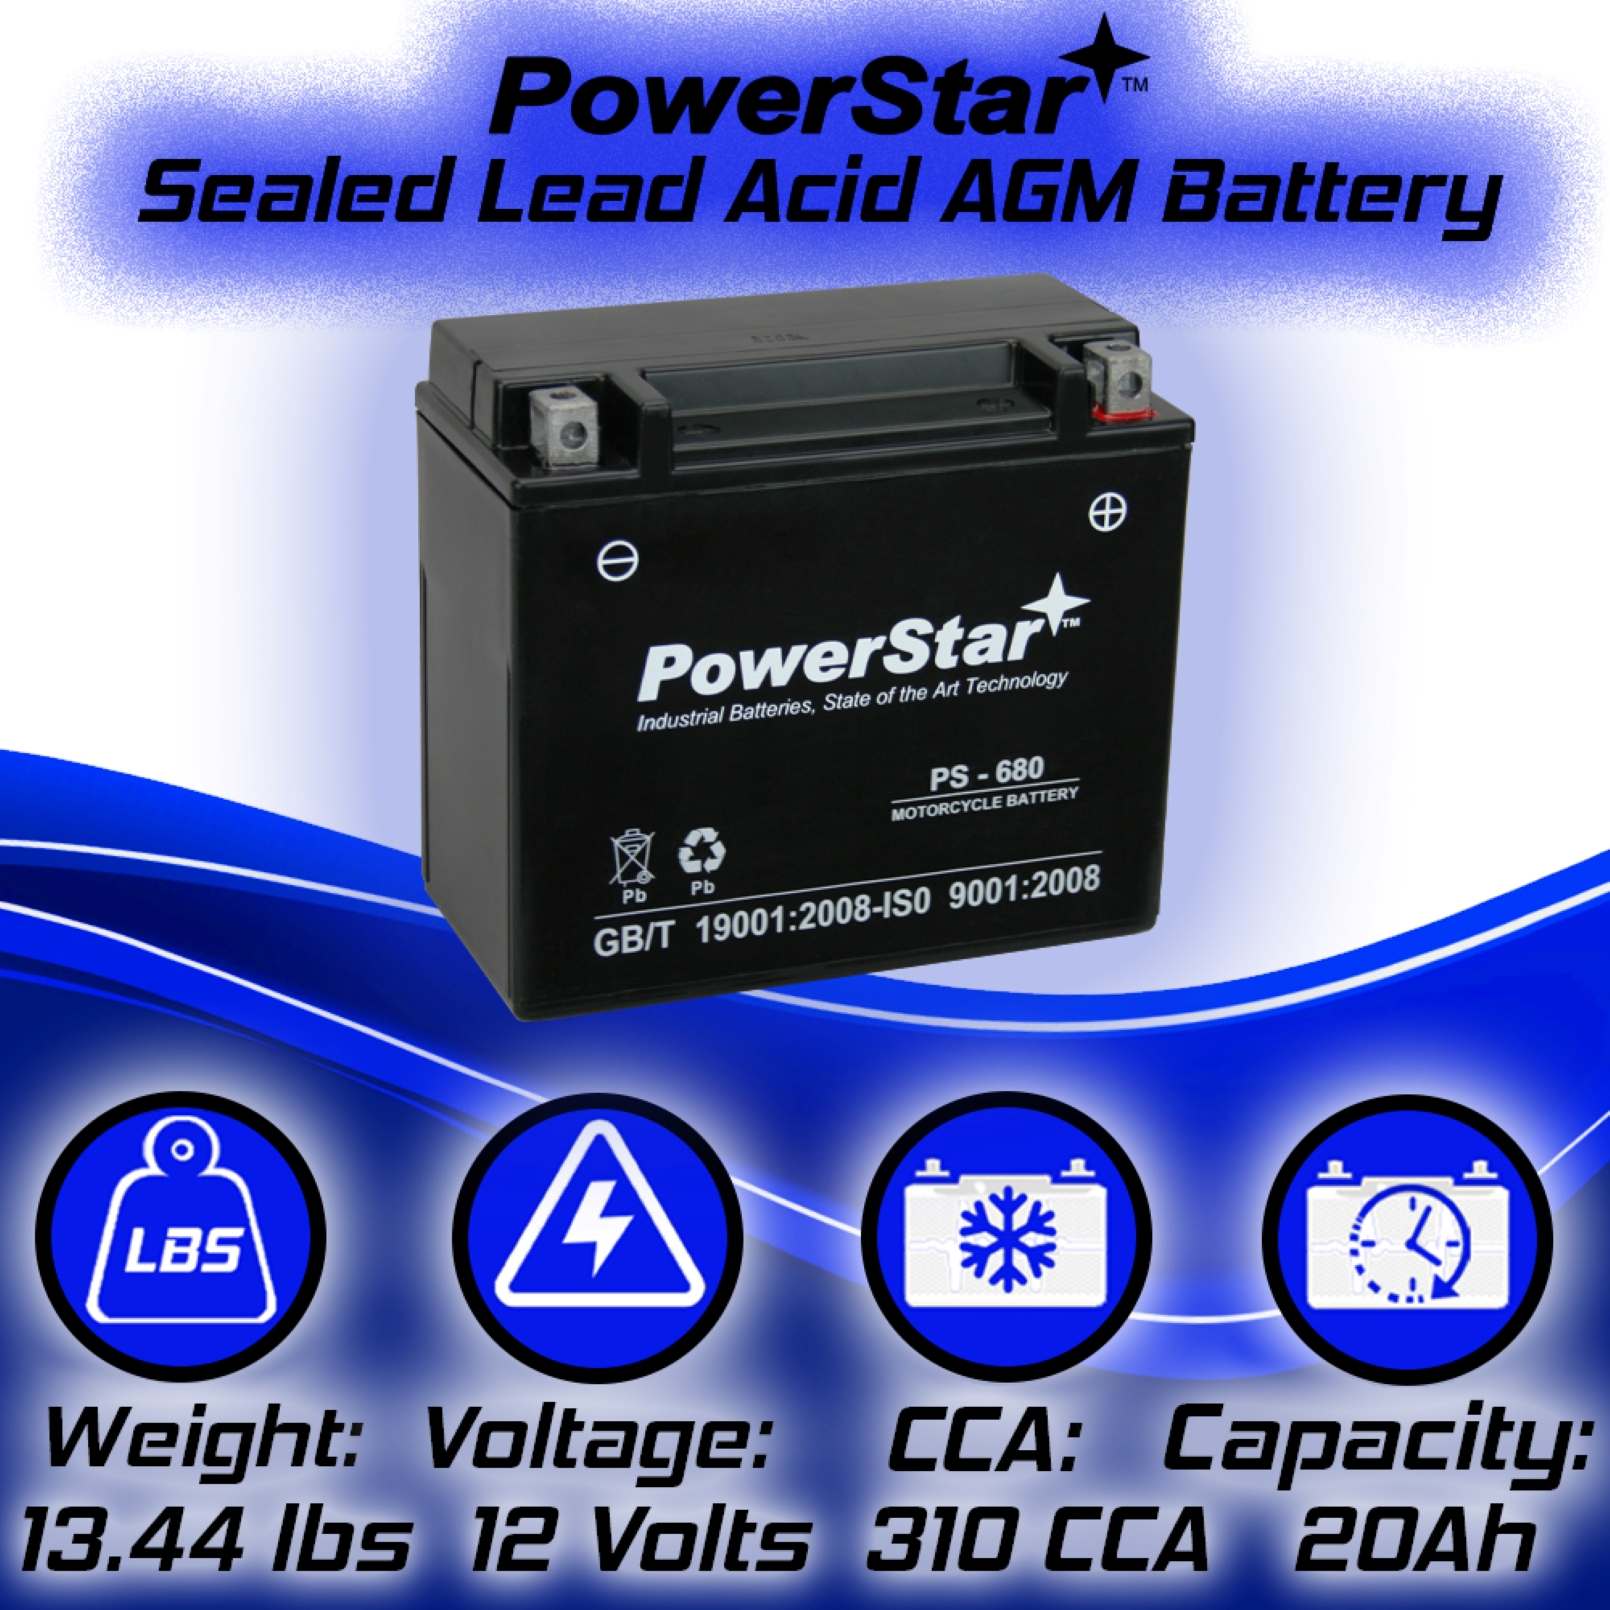 PowerStar PS-680 Motorsports Battery Compatible with Harley DavidsonFXD Dyne Super Glide 2007 to 2010